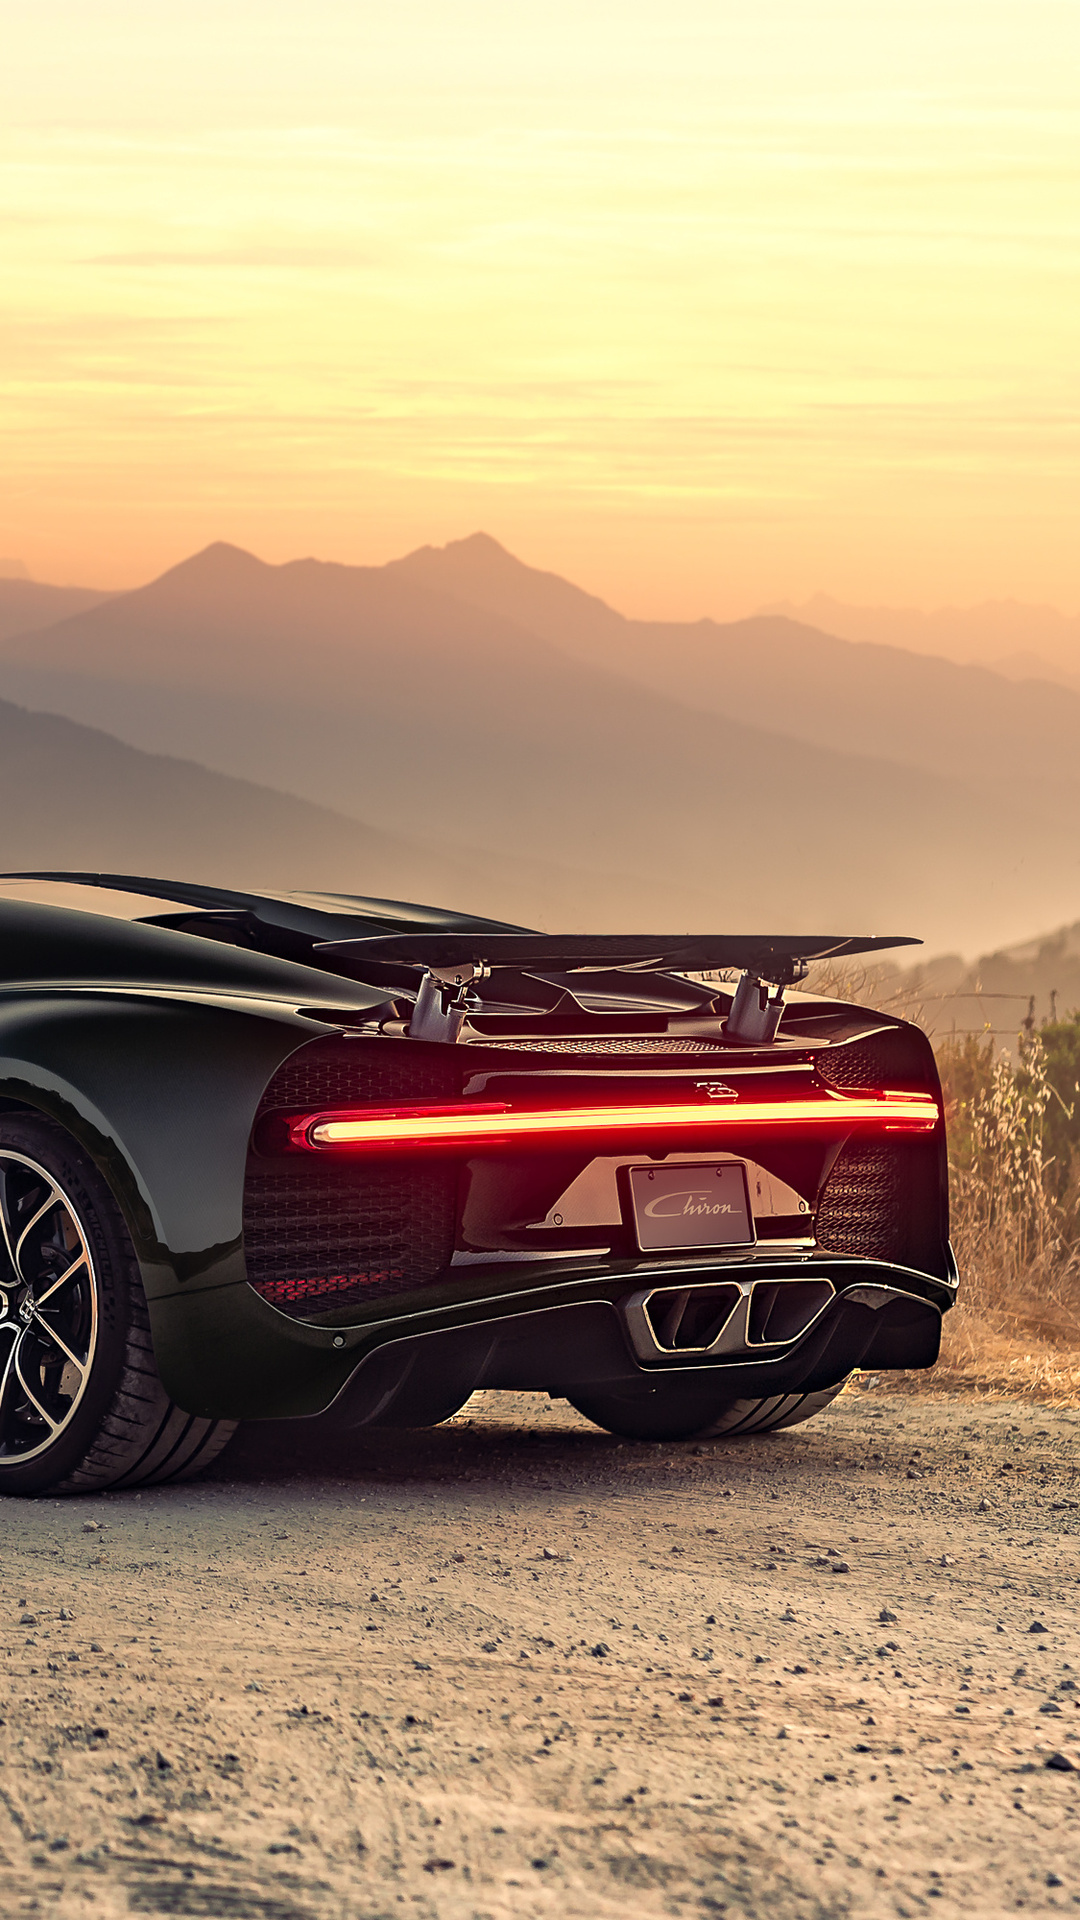 1080x1920 Bugatti Chiron Rear 4k Iphone 7,6s,6 Plus, Pixel xl ,One Plus  3,3t,5 HD 4k Wallpapers, Images, Backgrounds, Photos and Pictures